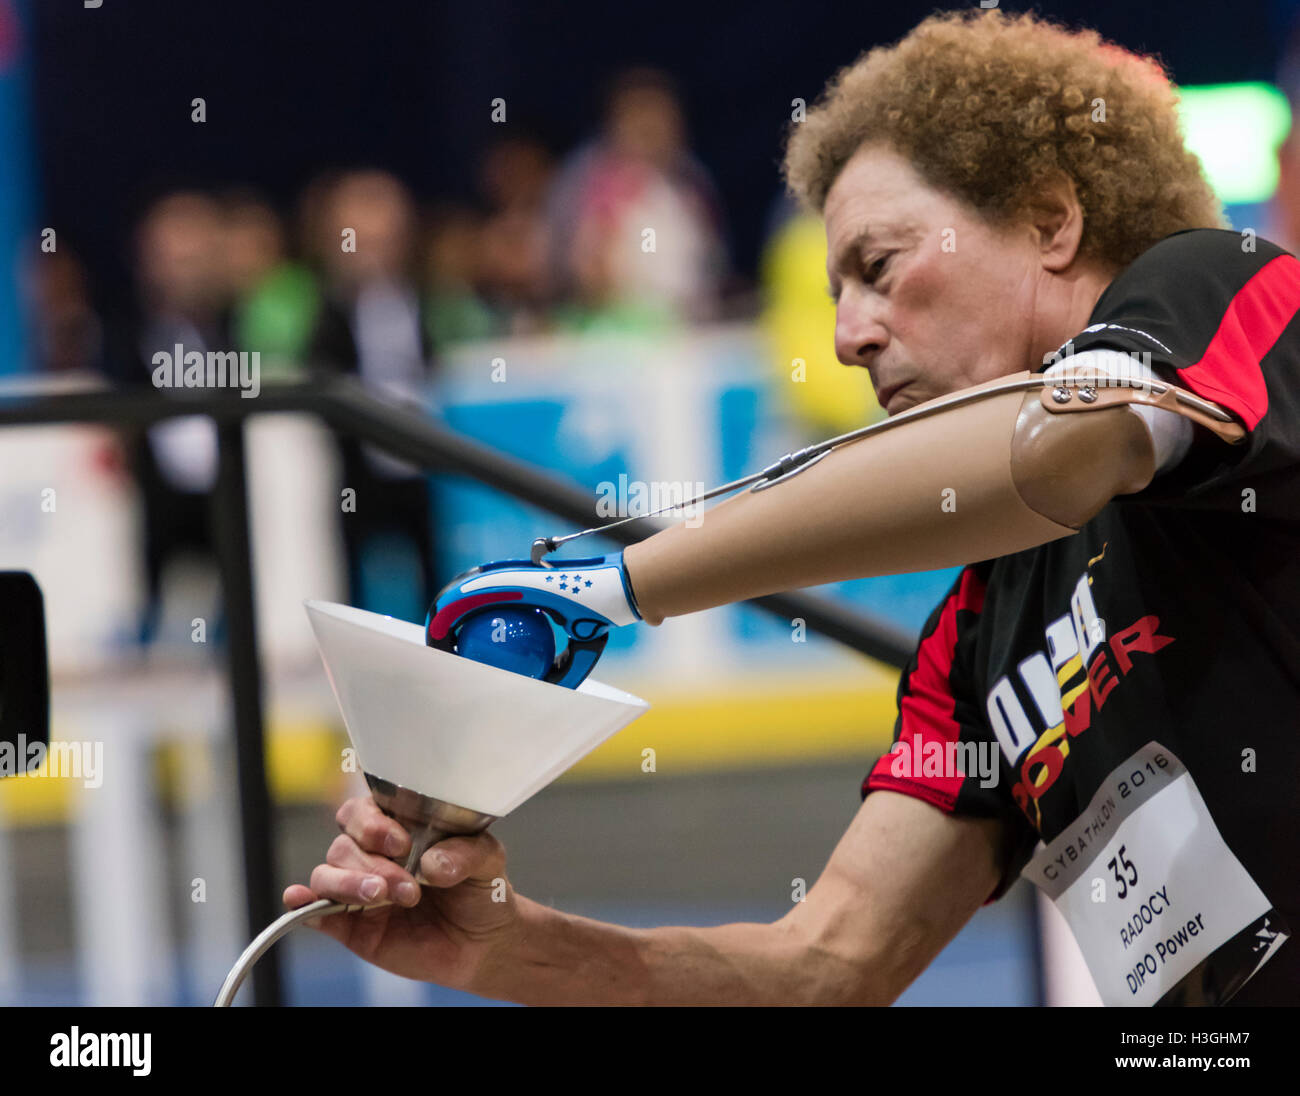 Kloten, Switzerland. 8th Oct, 2016. Bob Radocy (USA) is changing a lightbulb at the powered arm prosthetics race at Cybathlon, the first championship for racing pilots with disabilities using bionic devices at the Swiss Arena in Kloten (Zurich), Switzerland. Organized by the Swiss Federal Institute of Technology (ETH) in Zurich, Cybathlon brings together interdisciplinary teams of bio-engineers, scientists and athletes with physical disabilities to compete in solving everyday tasks and to demonstrate how technology enables them to overcome physical limitations of their body. © Erik Tham/Alamy Stock Photo